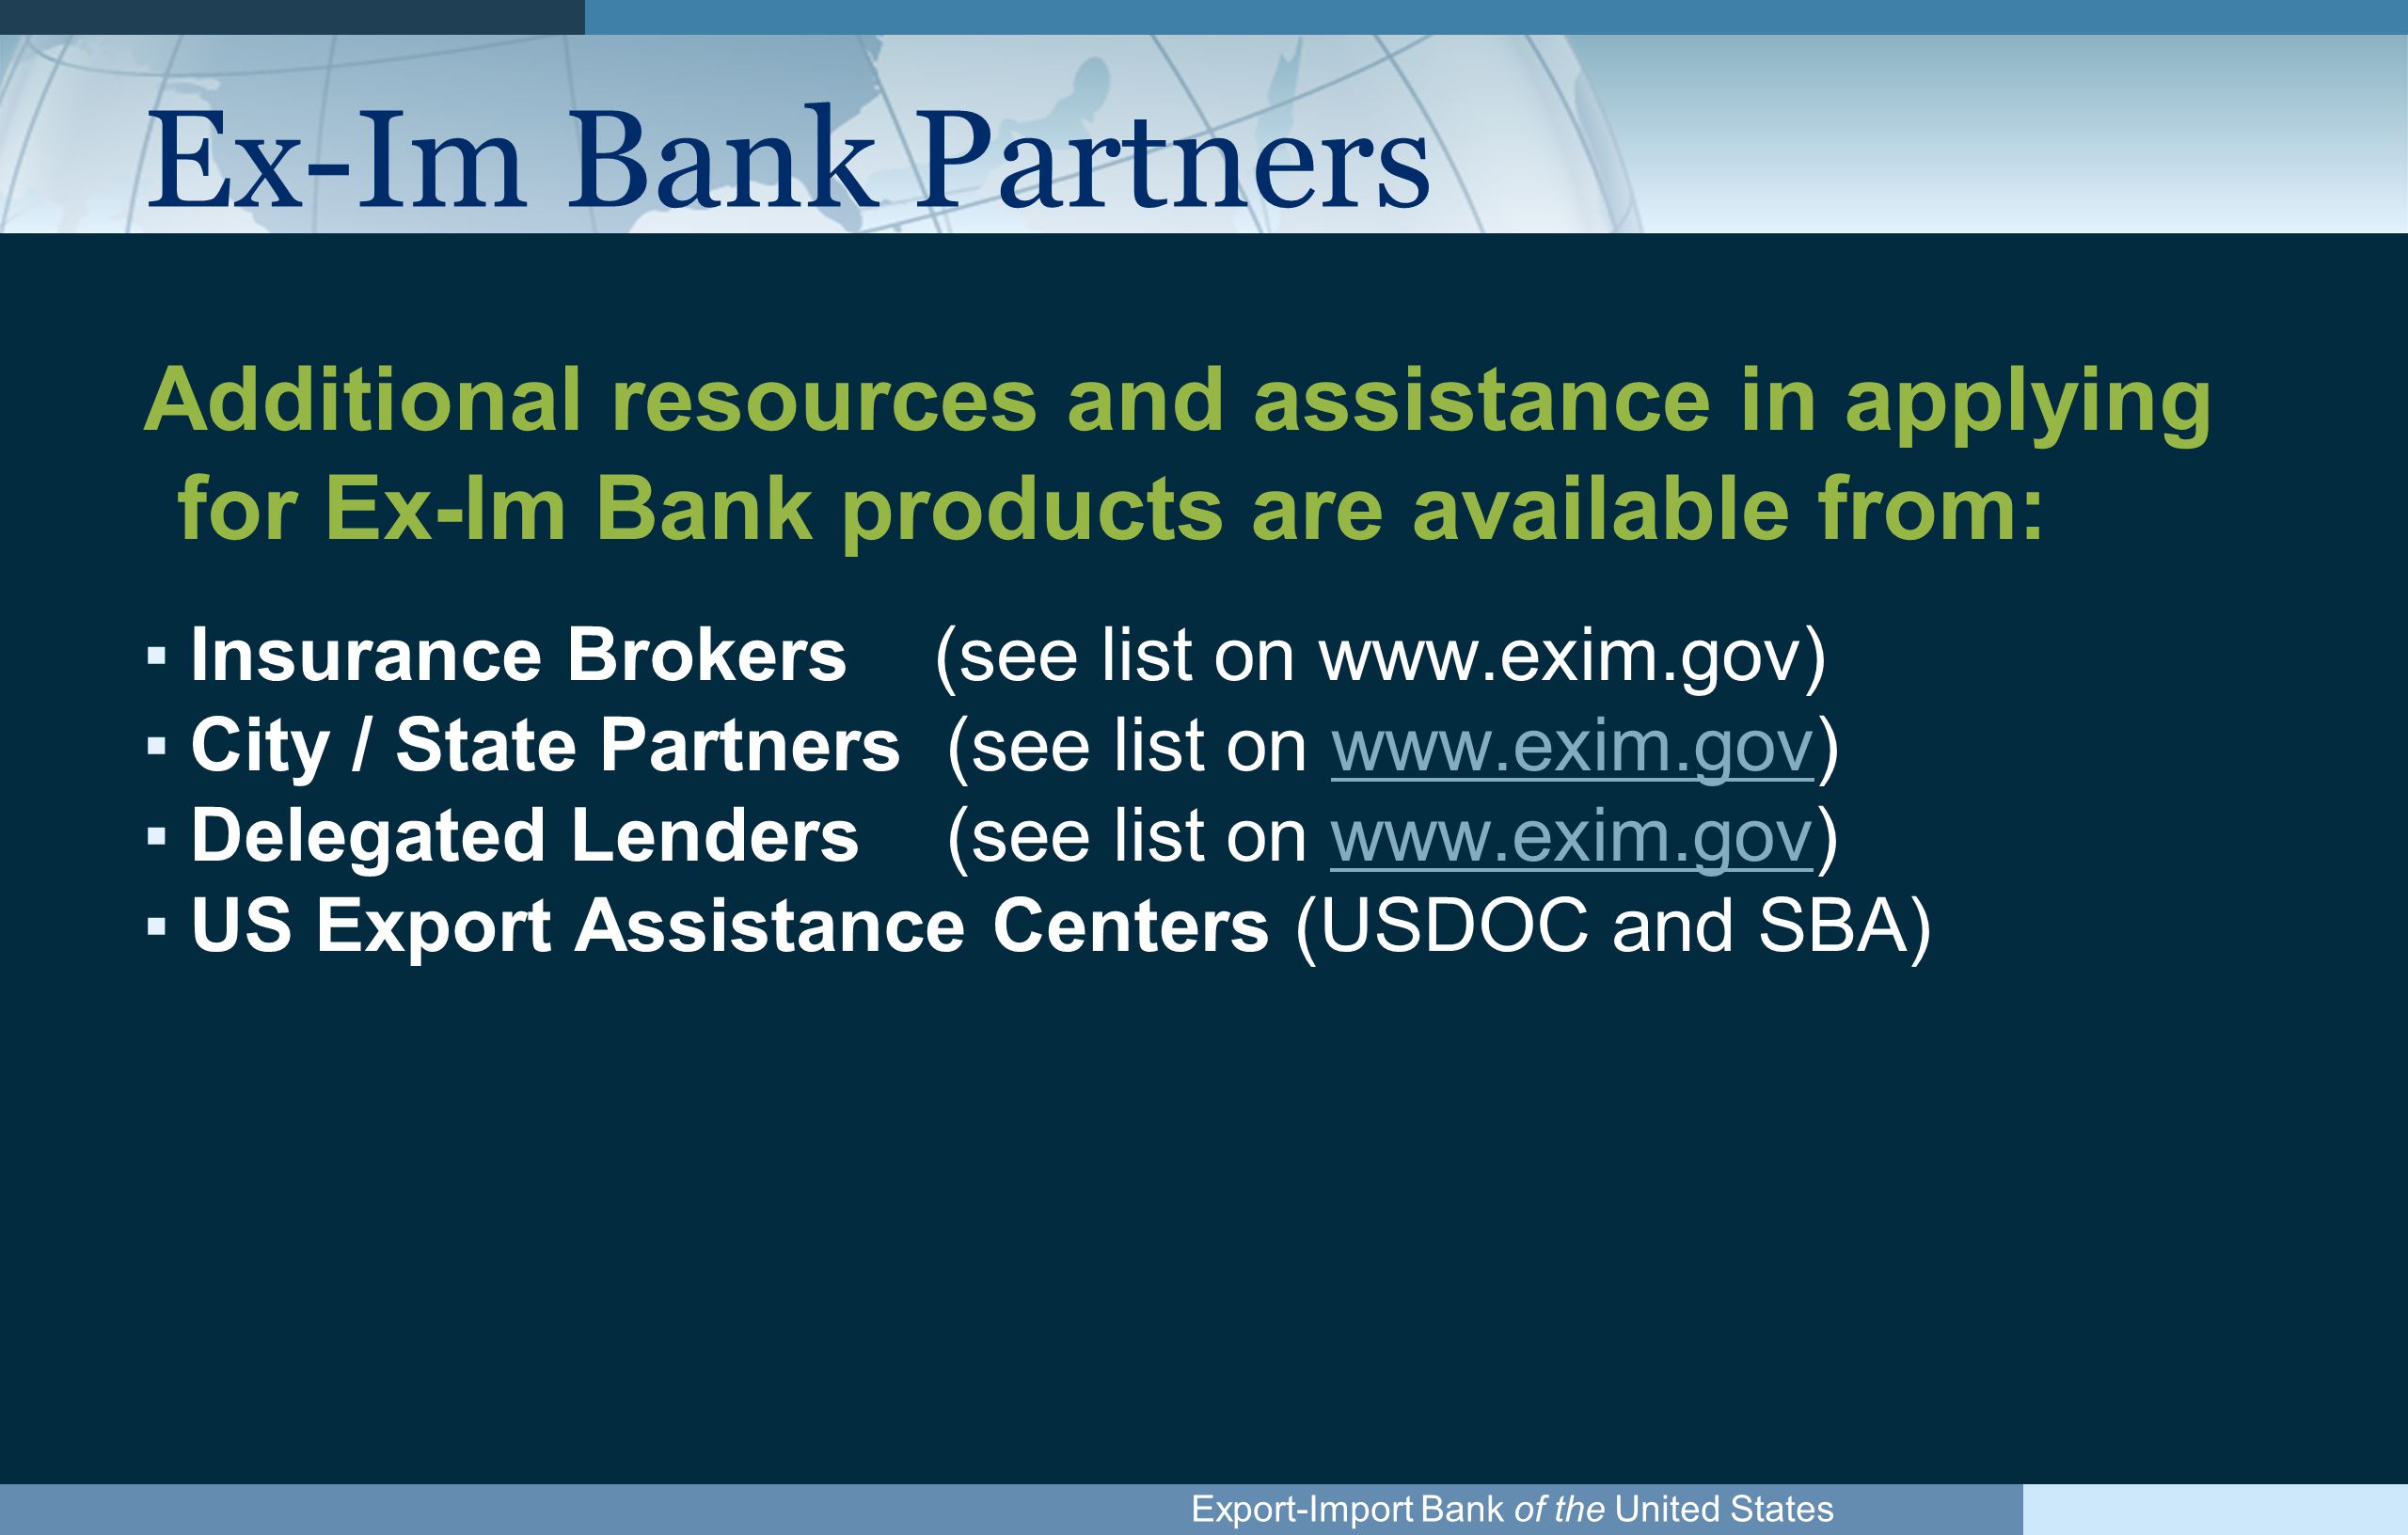 Export-Import Bank of the United States Ex-Im Bank Partners Additional resources and assistance in applying for Ex-Im Bank products are available from: ▪Insurance Brokers (see list on   ▪City / State Partners (see list on   ▪Delegated Lenders (see list on   ▪US Export Assistance Centers (USDOC and SBA)